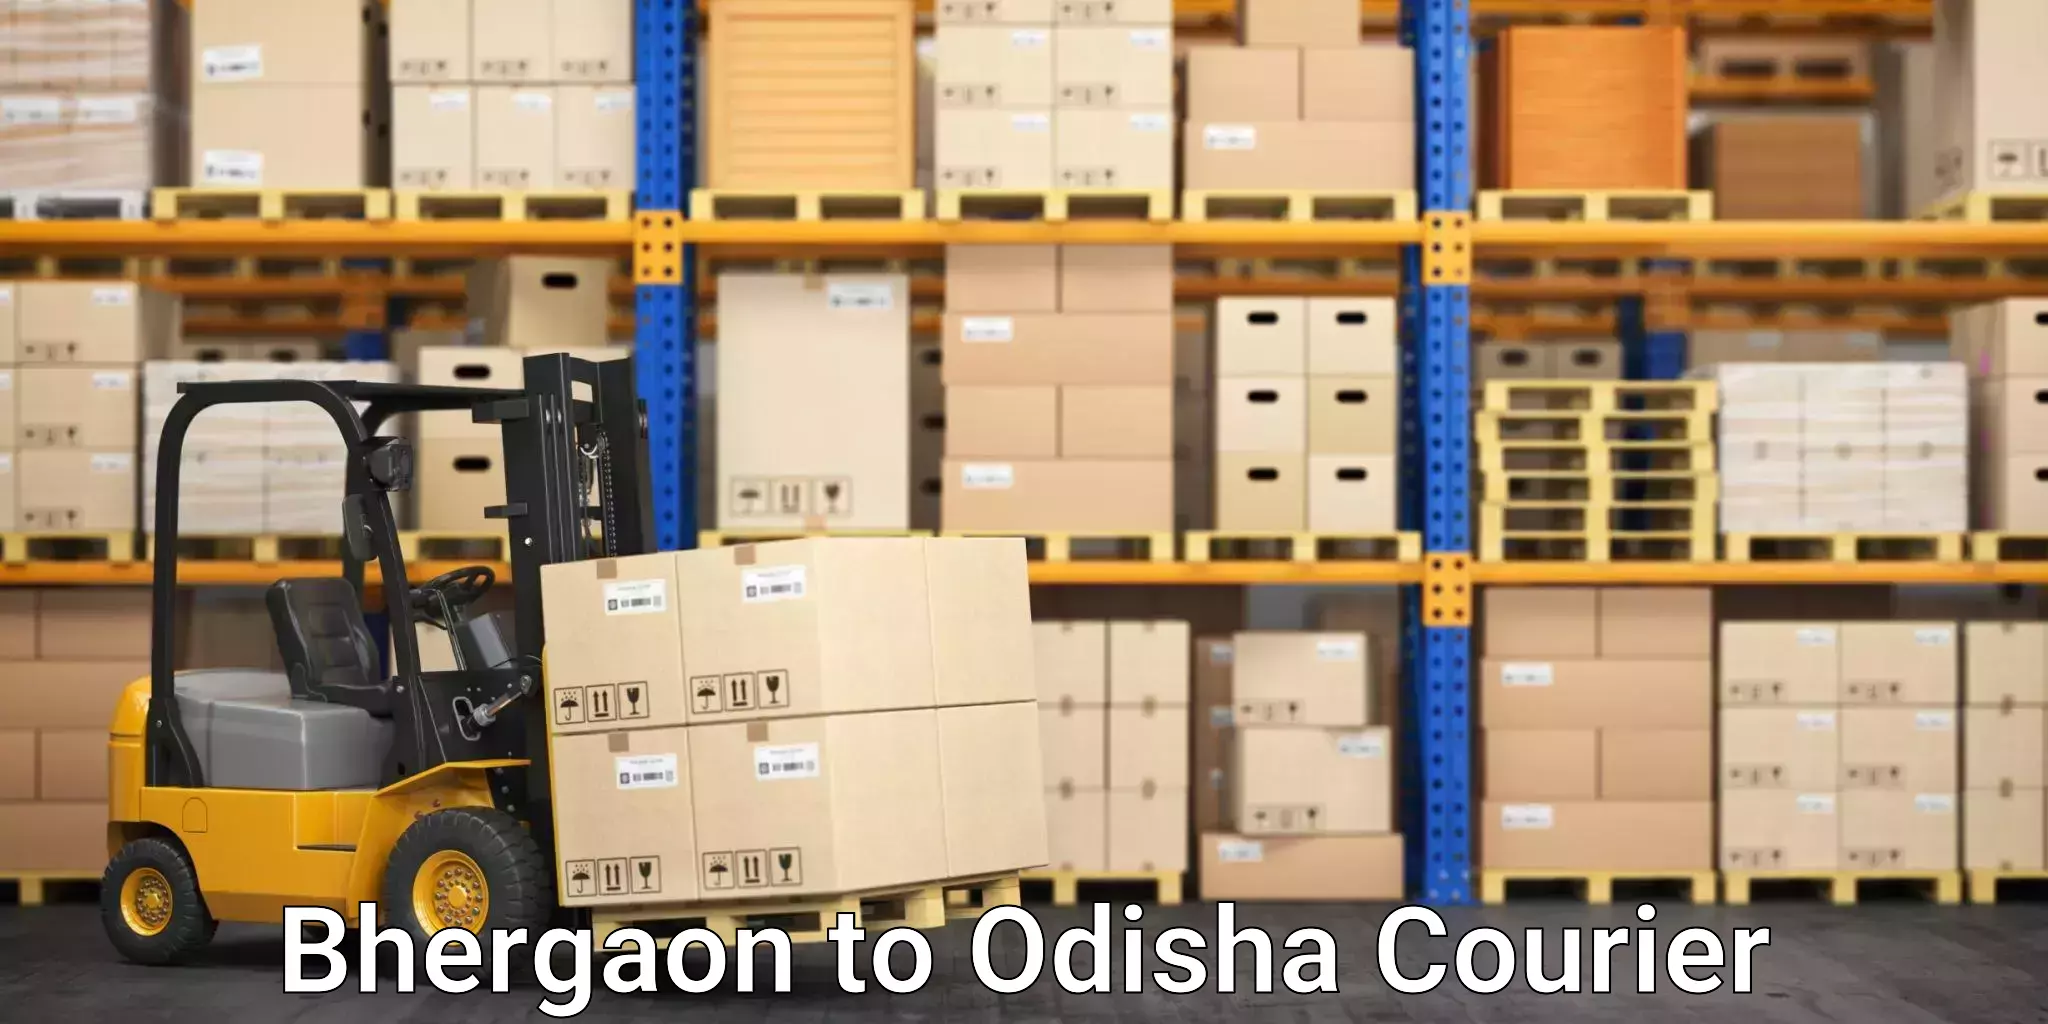 Rapid shipping services in Bhergaon to Odisha